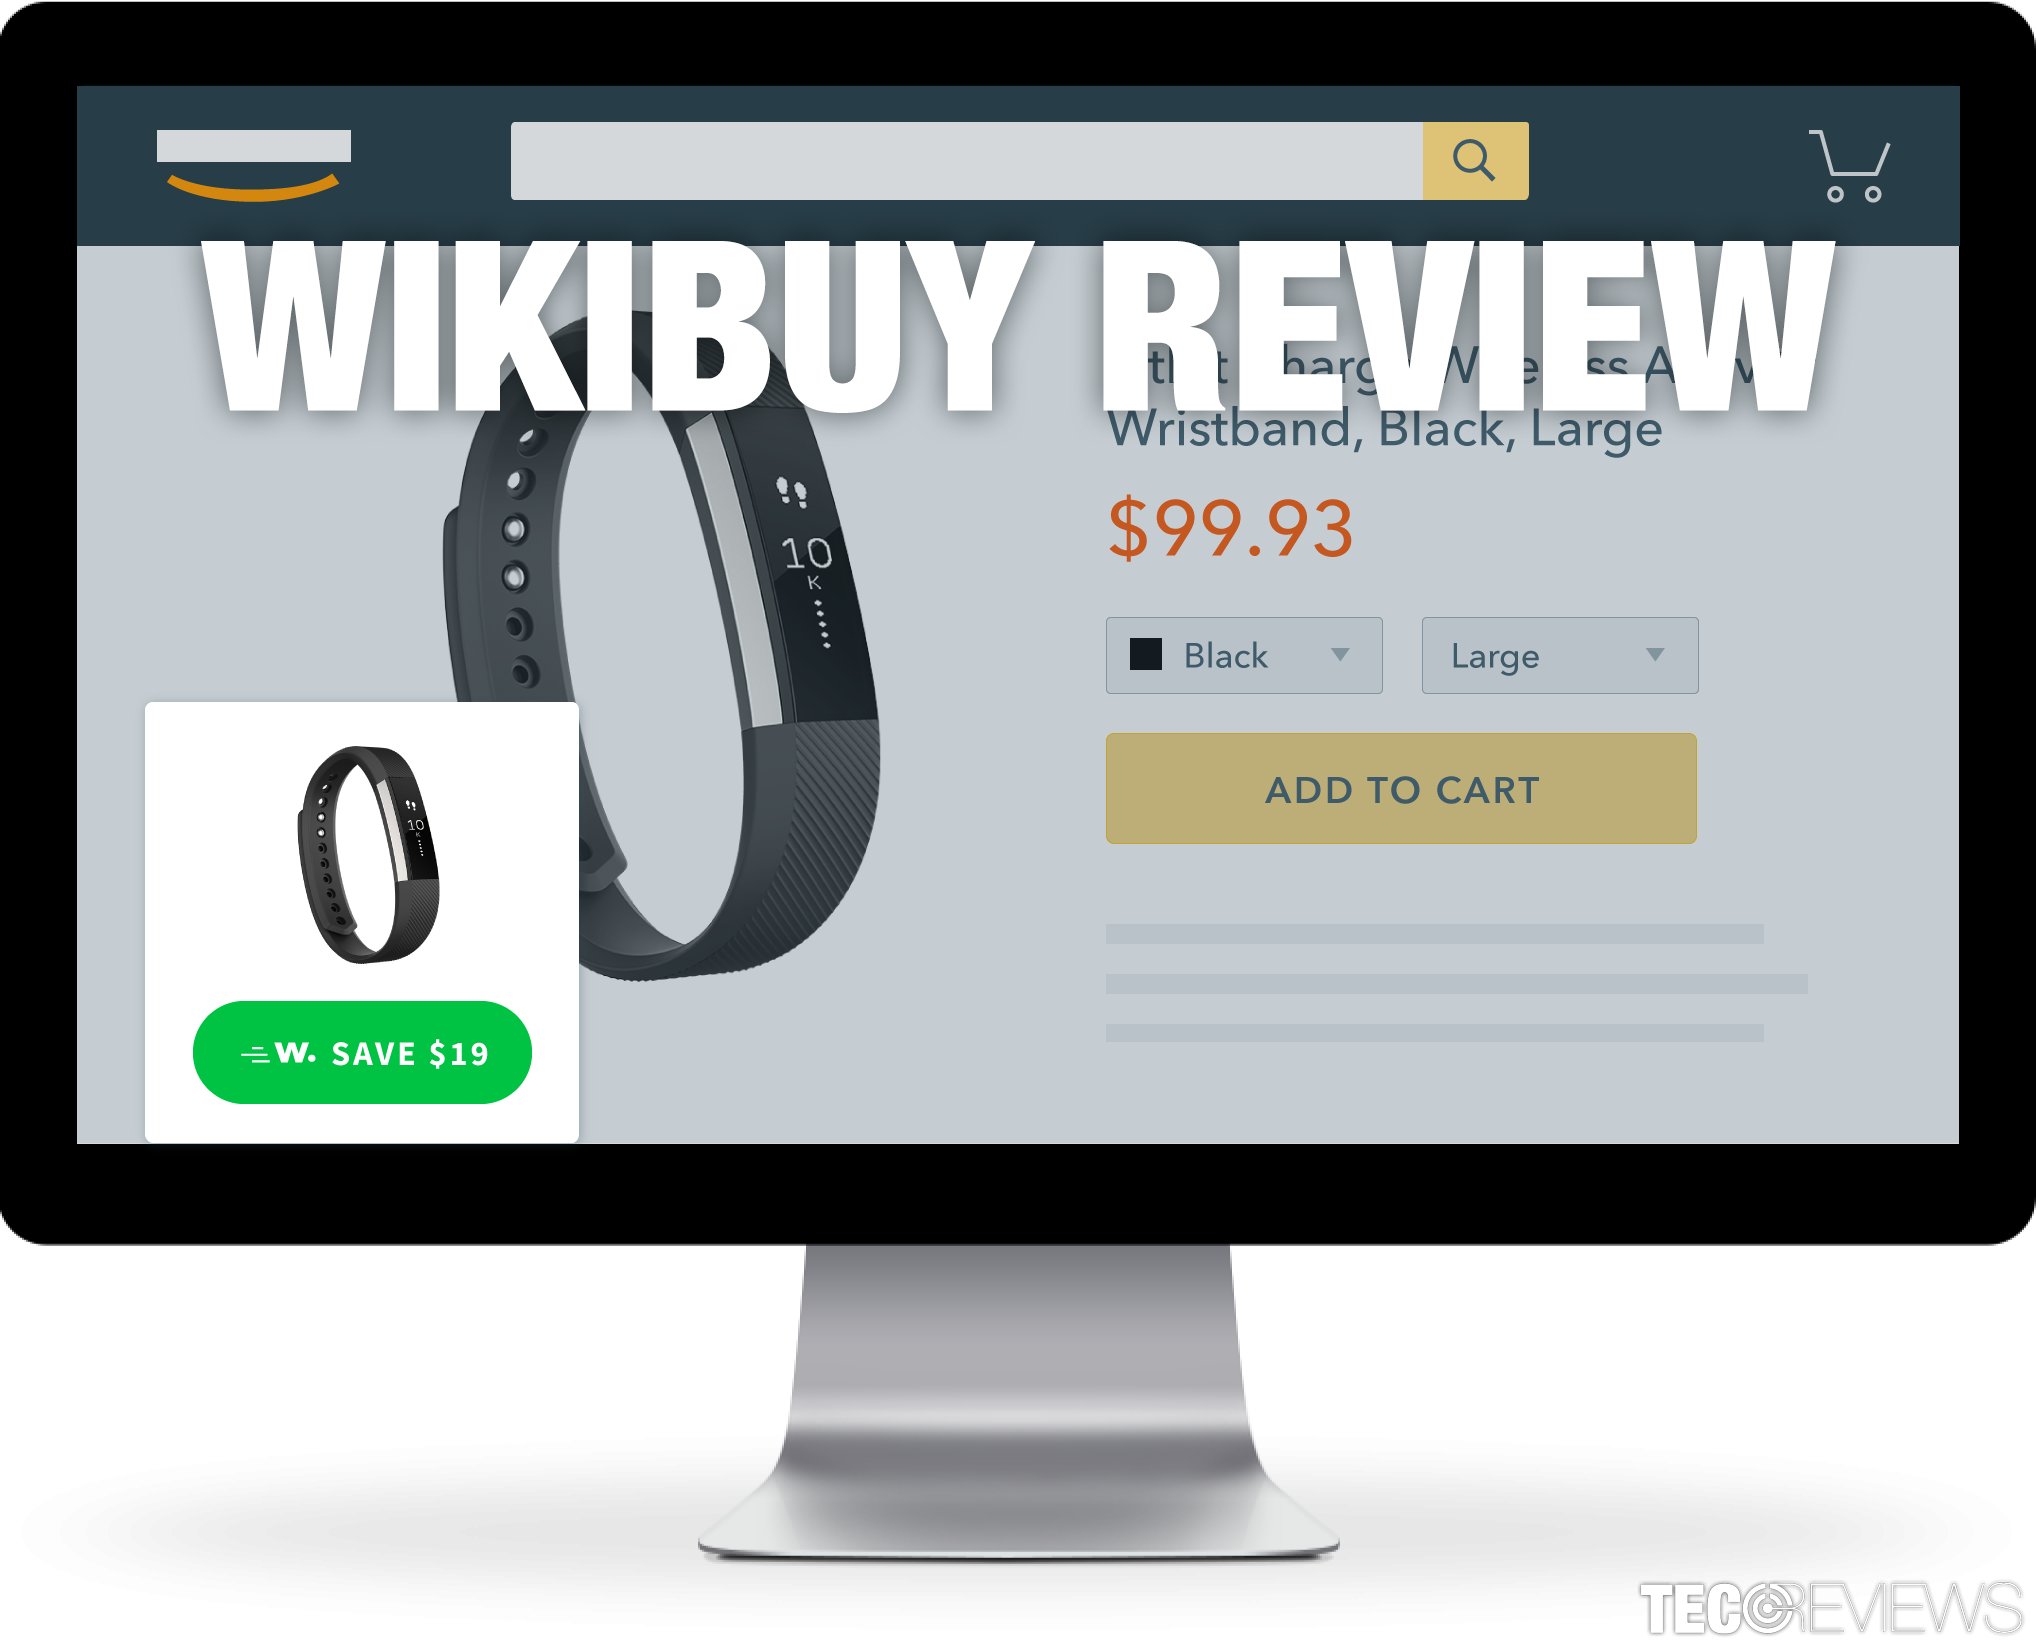 Wikibuy Reviews